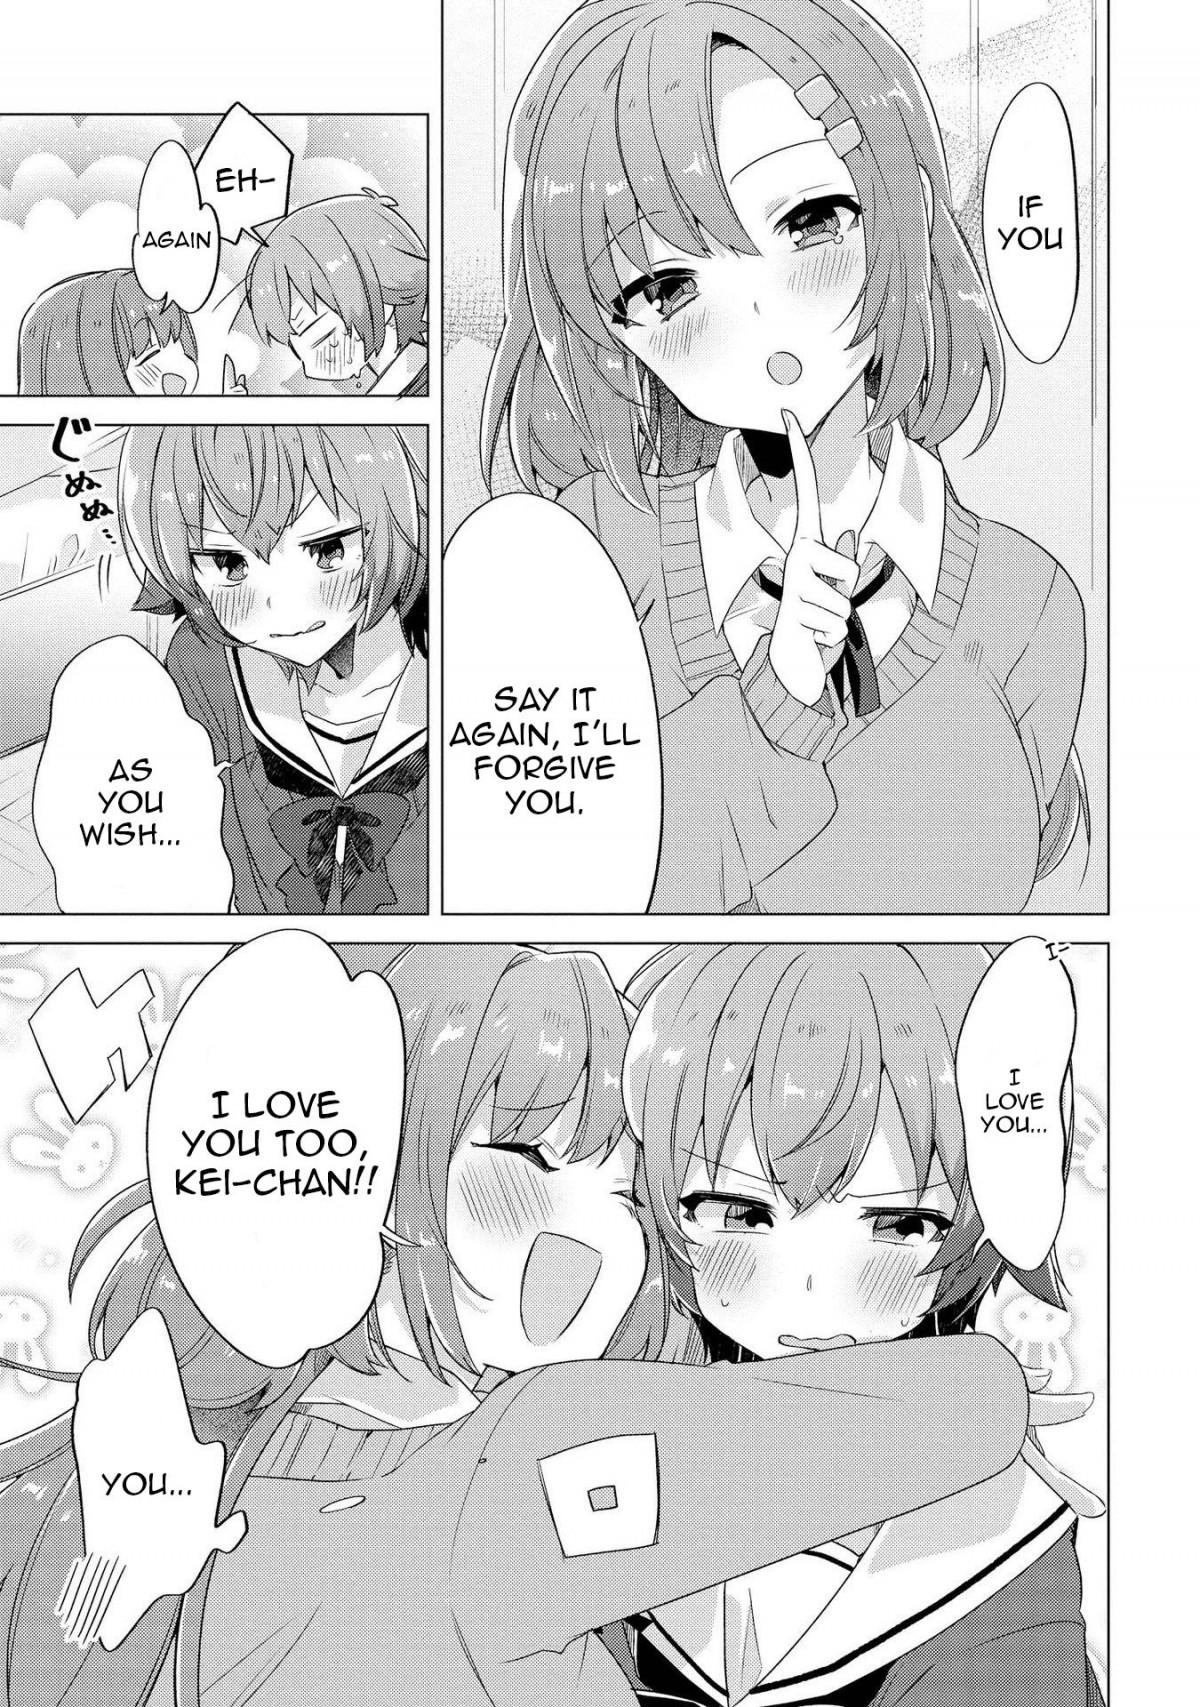 Love Me Again Manga Ch 1 I Want You to Say You Love Me (Anthology) Ch.1 Page 26 - Mangago